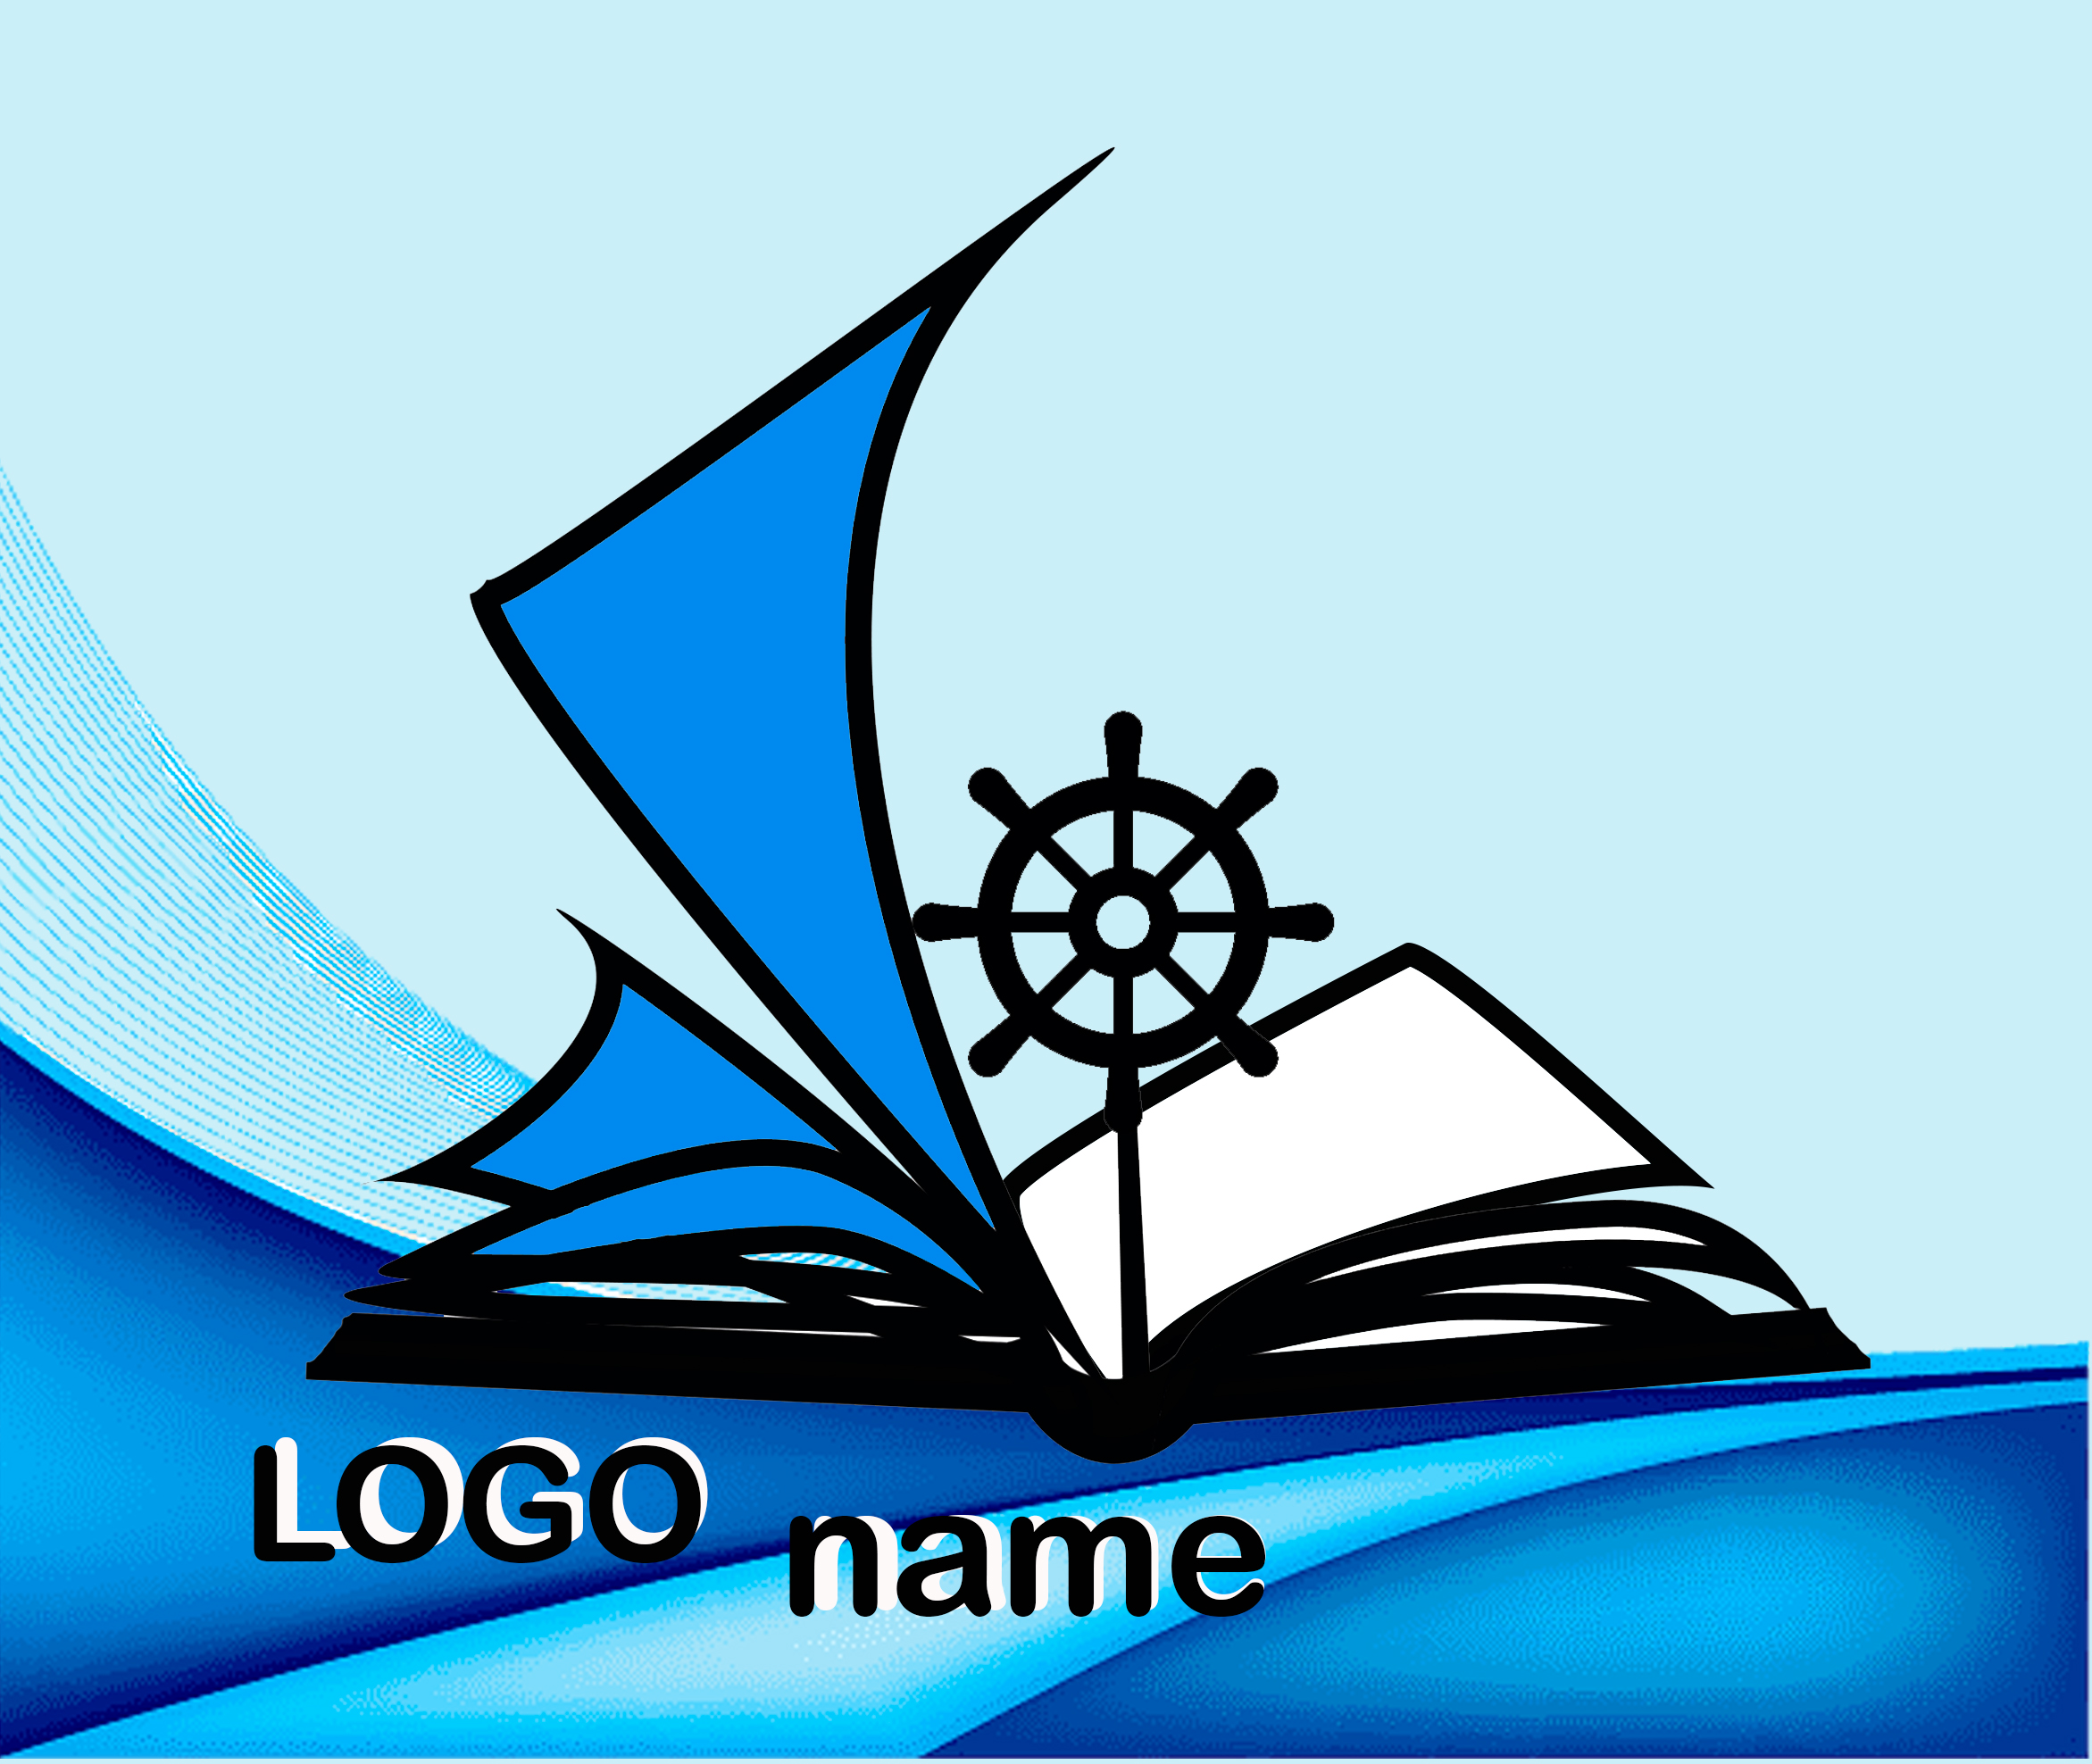 Logo for bookstore or public